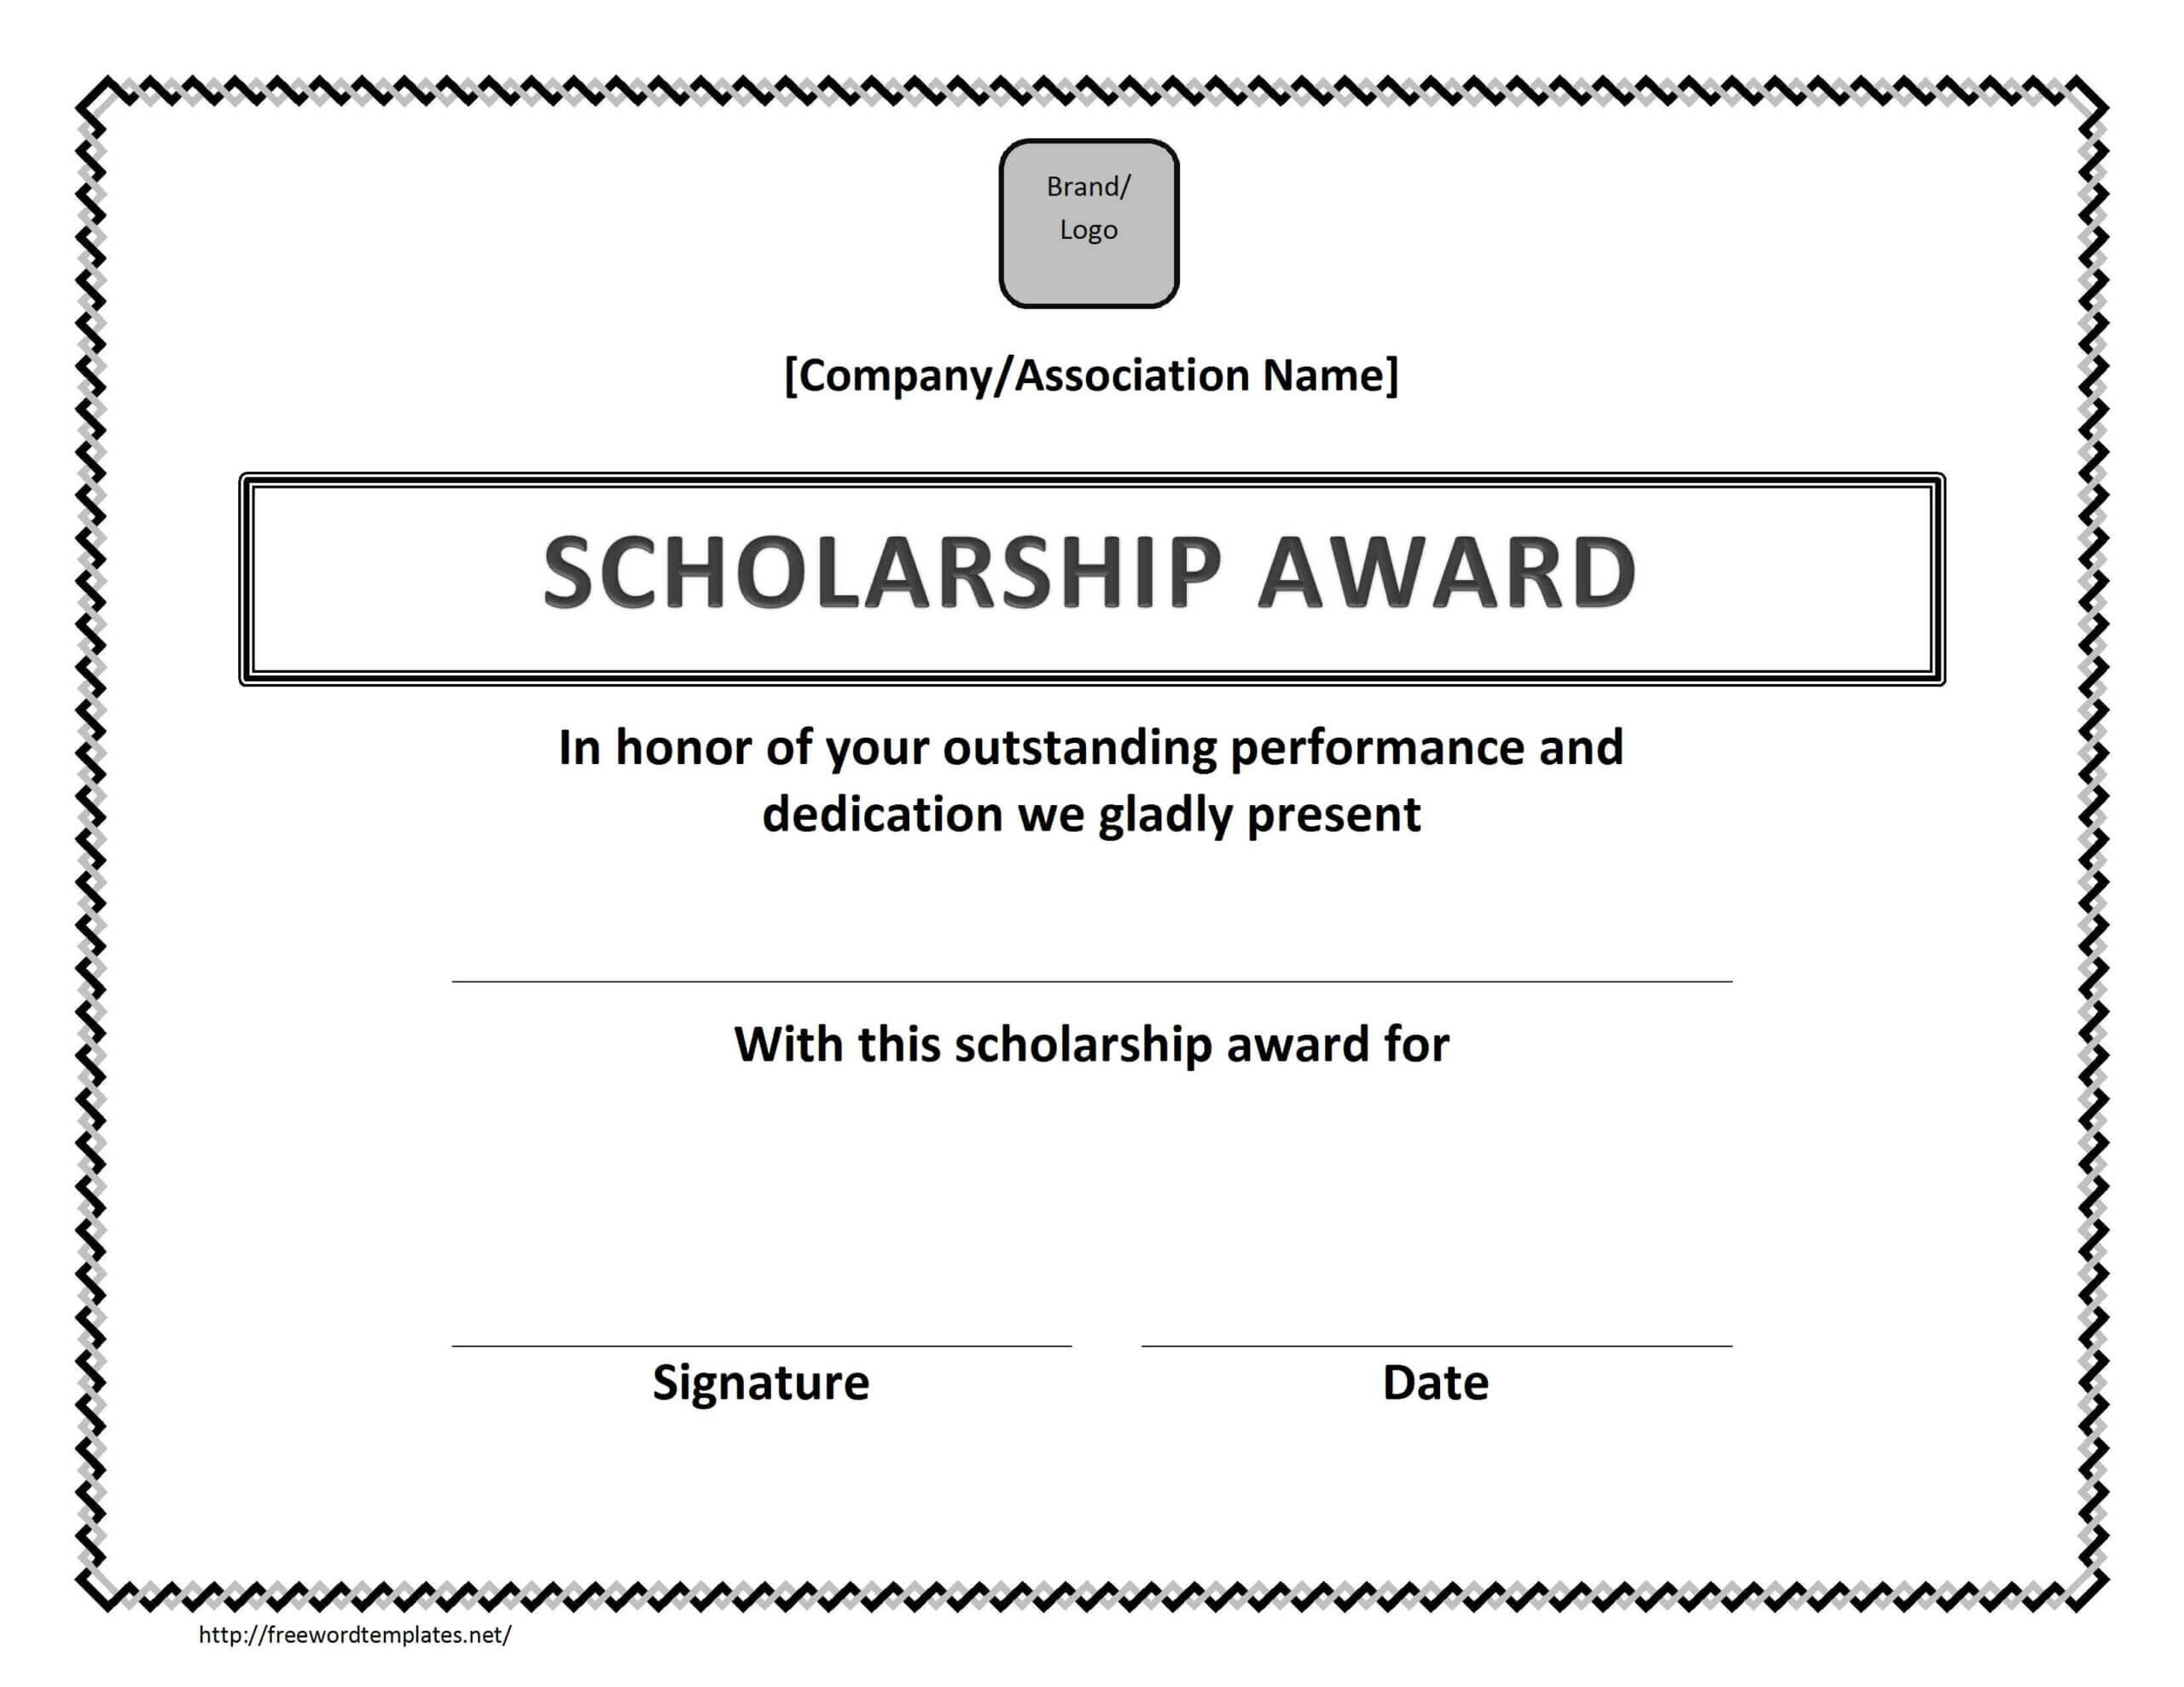 Scholarship Award Certificate Template Within Microsoft Word Award Certificate Template